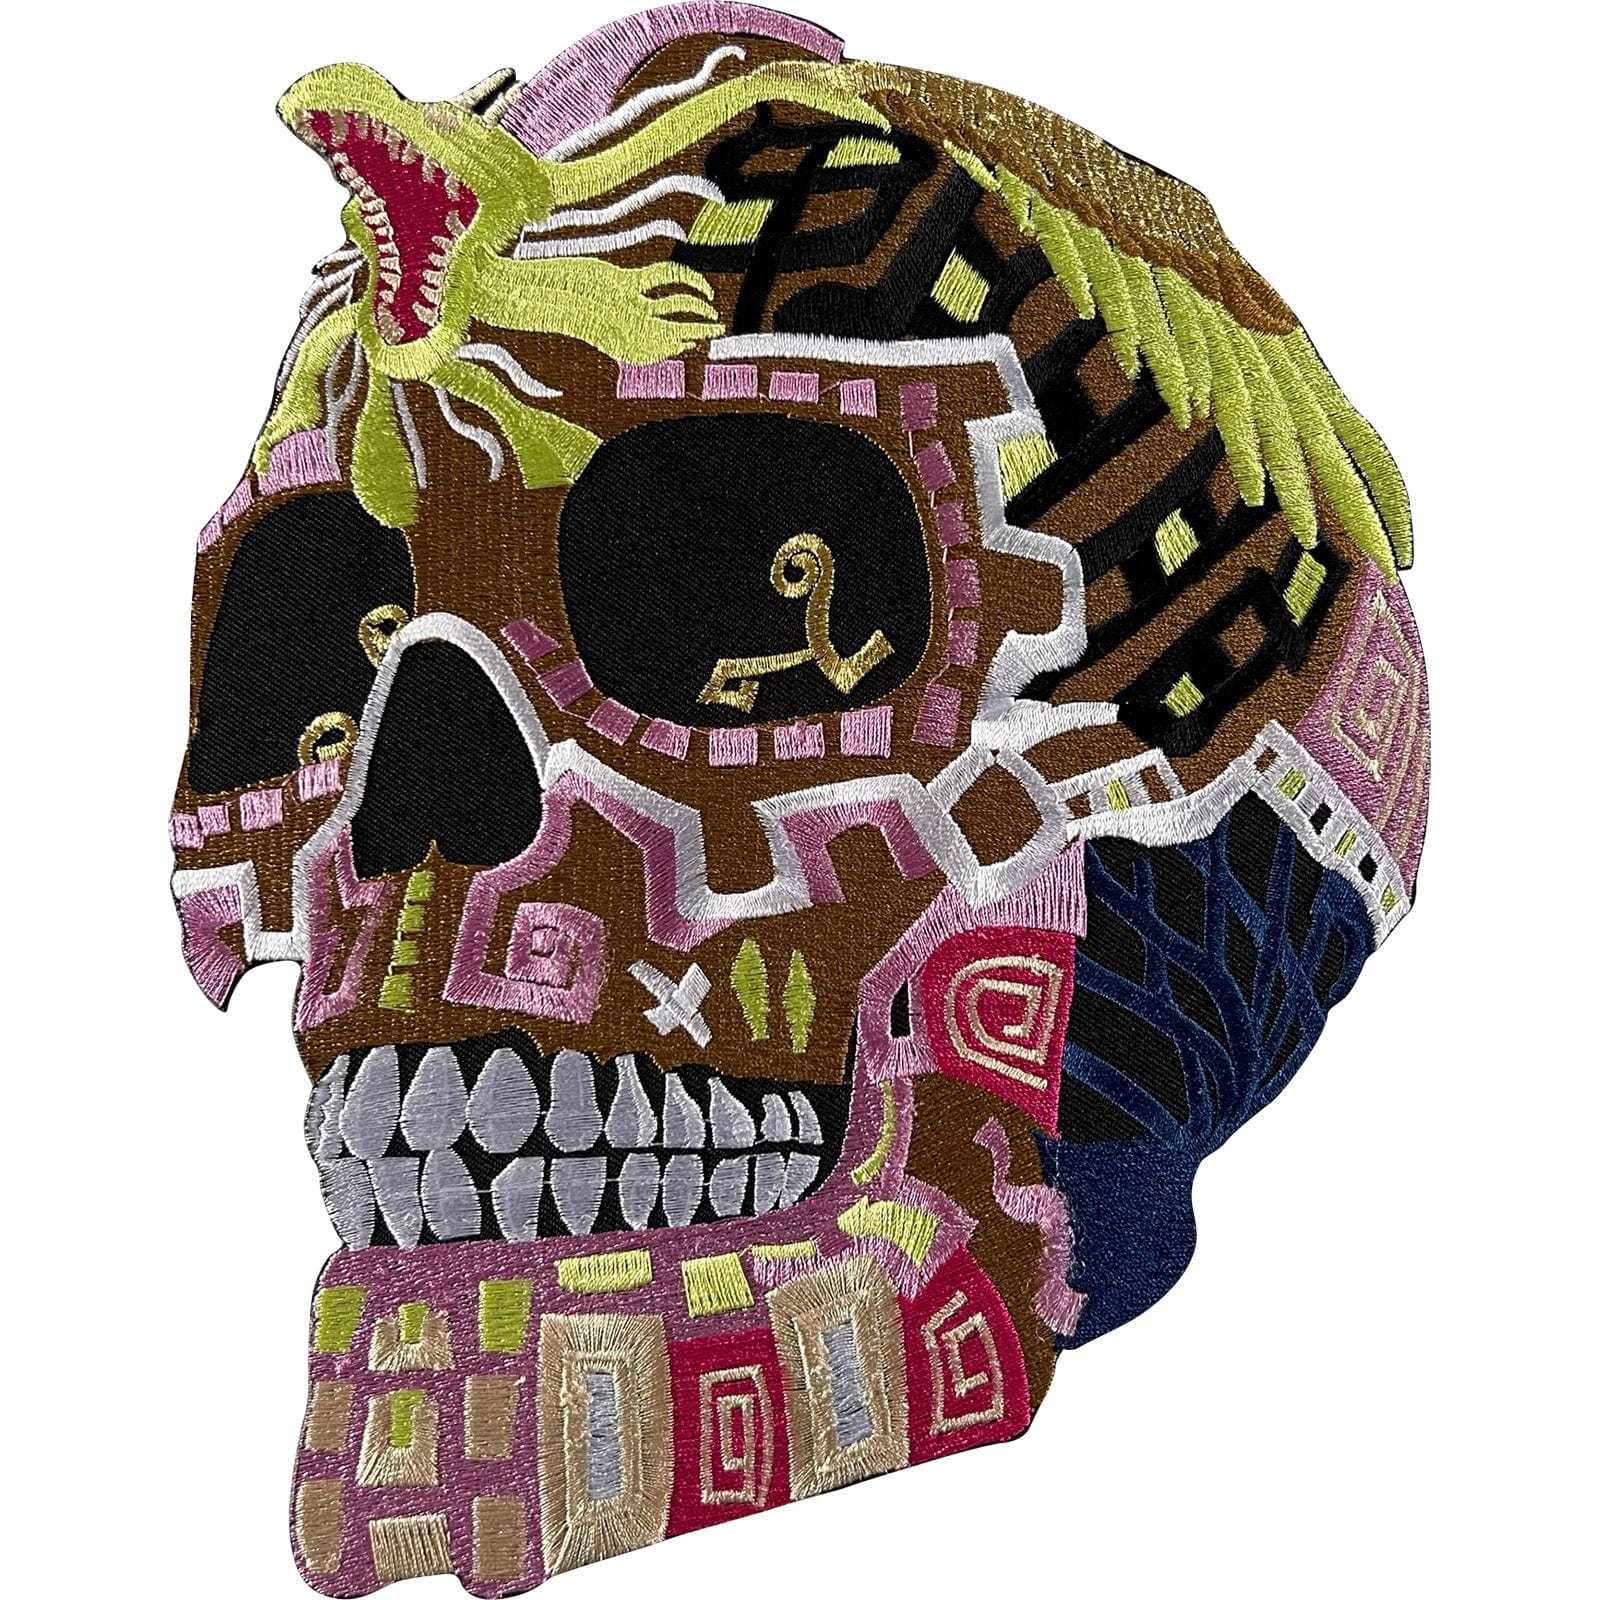 Big Inca Skull Patch Iron On Sew On Large Embroidered Craft Applique Badge Motif